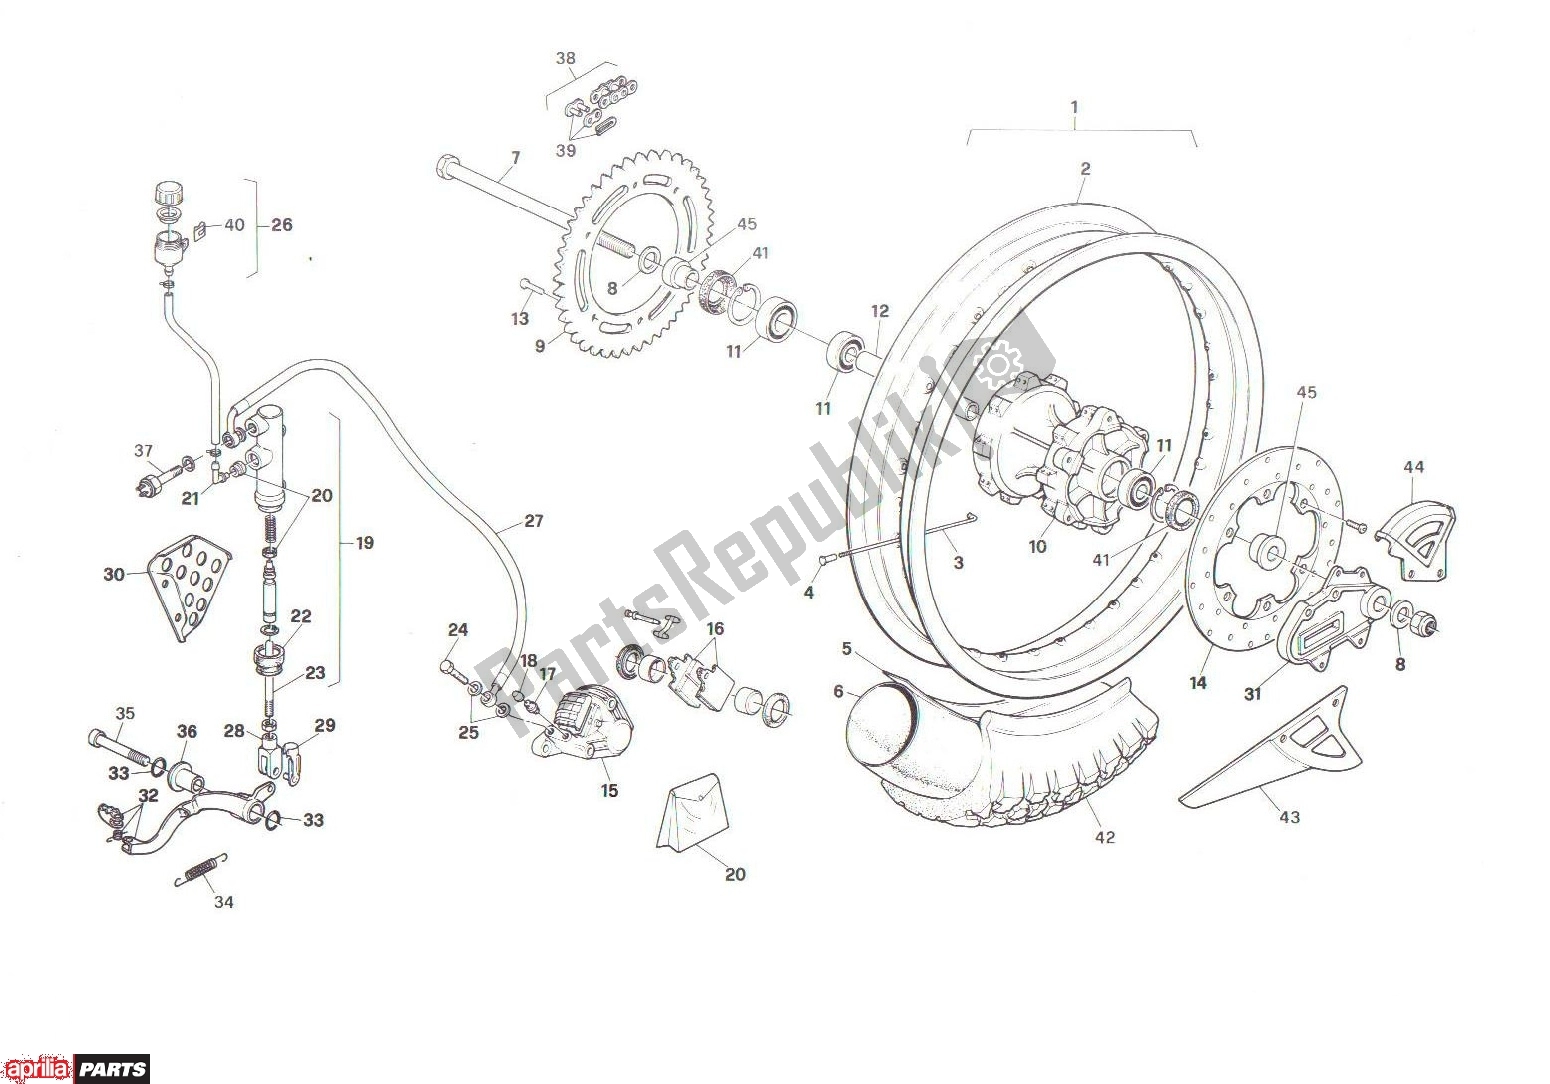 All parts for the Rear Wheel of the Aprilia RX 101 125 1989